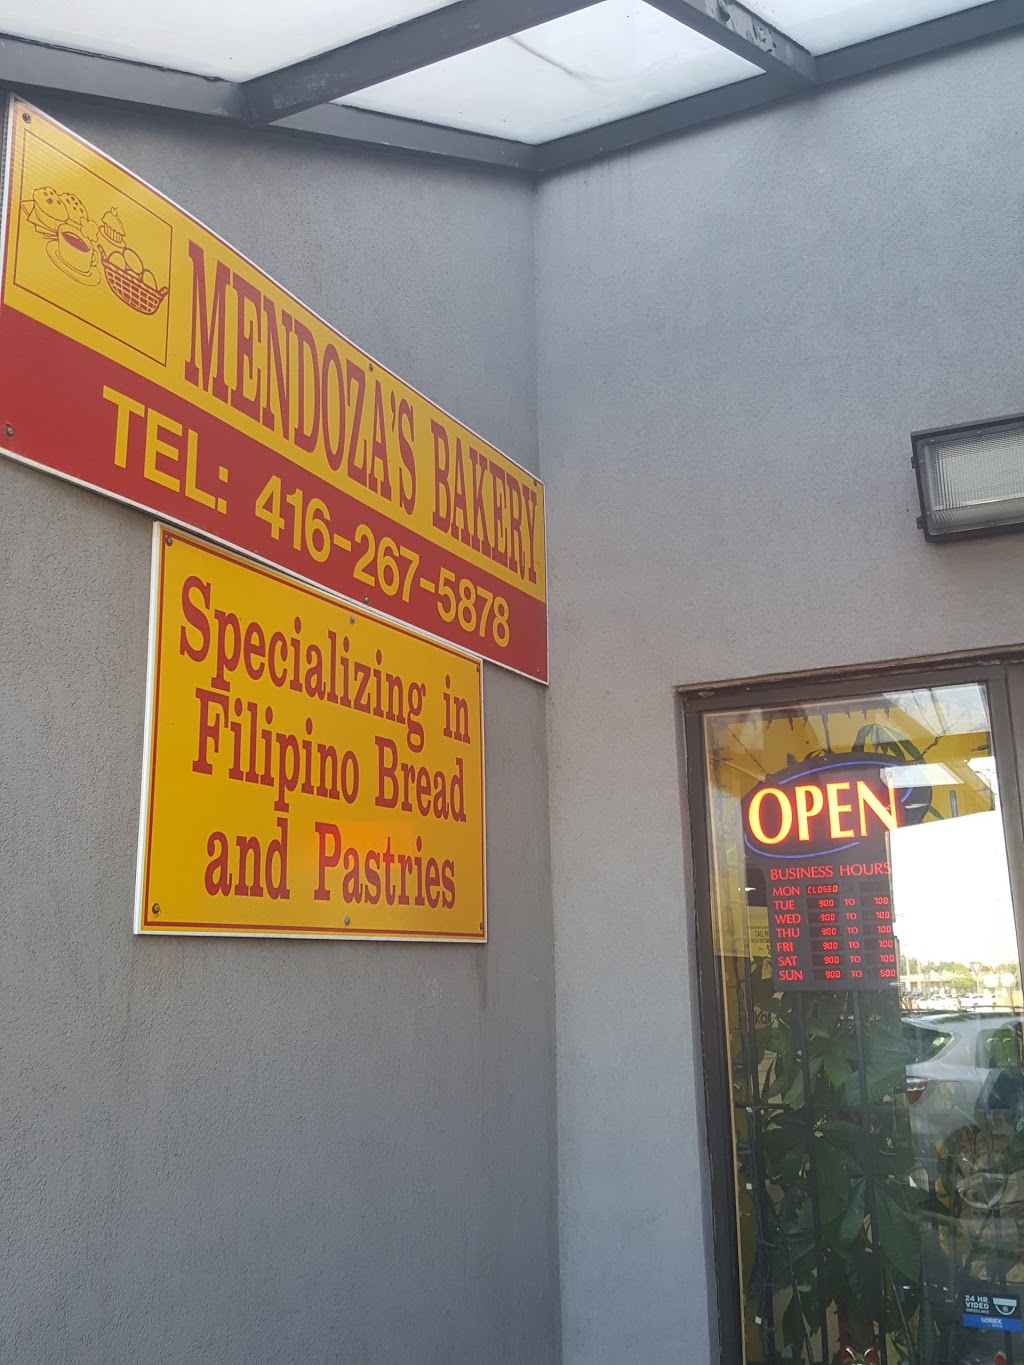 Mendozas Bakery | bakery | 1071 Danforth Rd, Scarborough, ON M1J 1E4, Canada | 4162675878 OR +1 416-267-5878